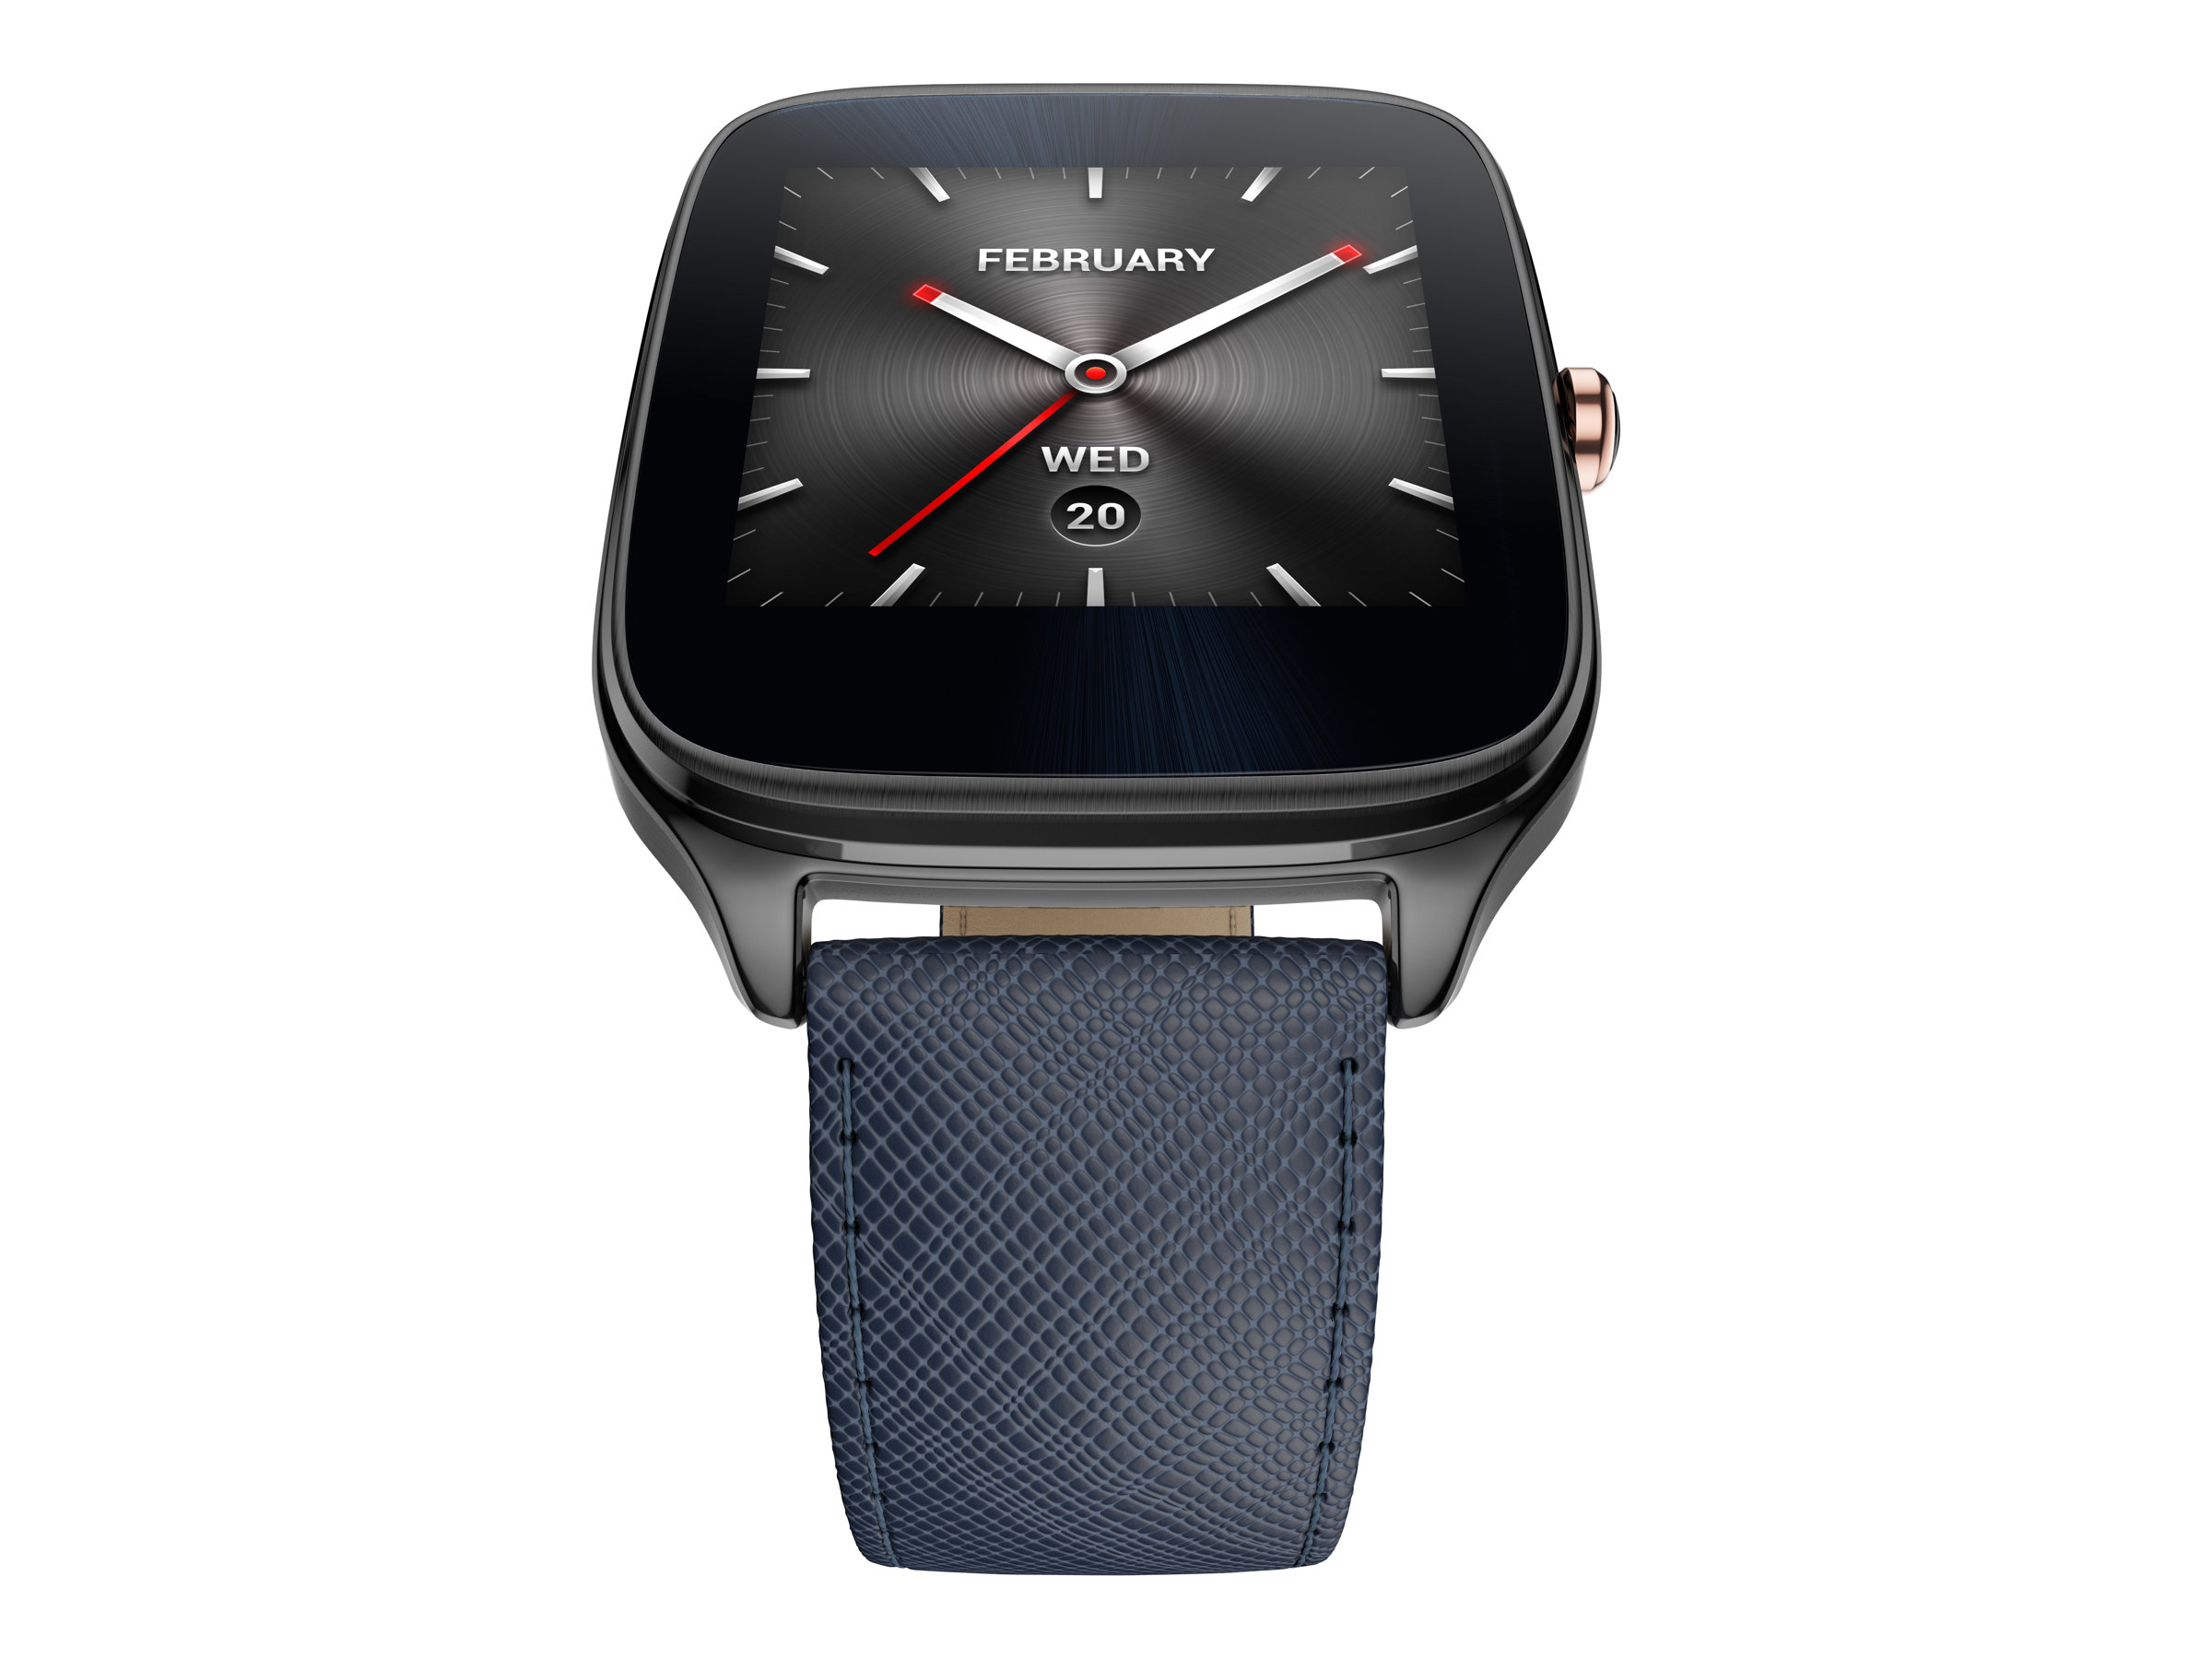 ASUS ZenWatch 2 WI501Q - full specs, details and review